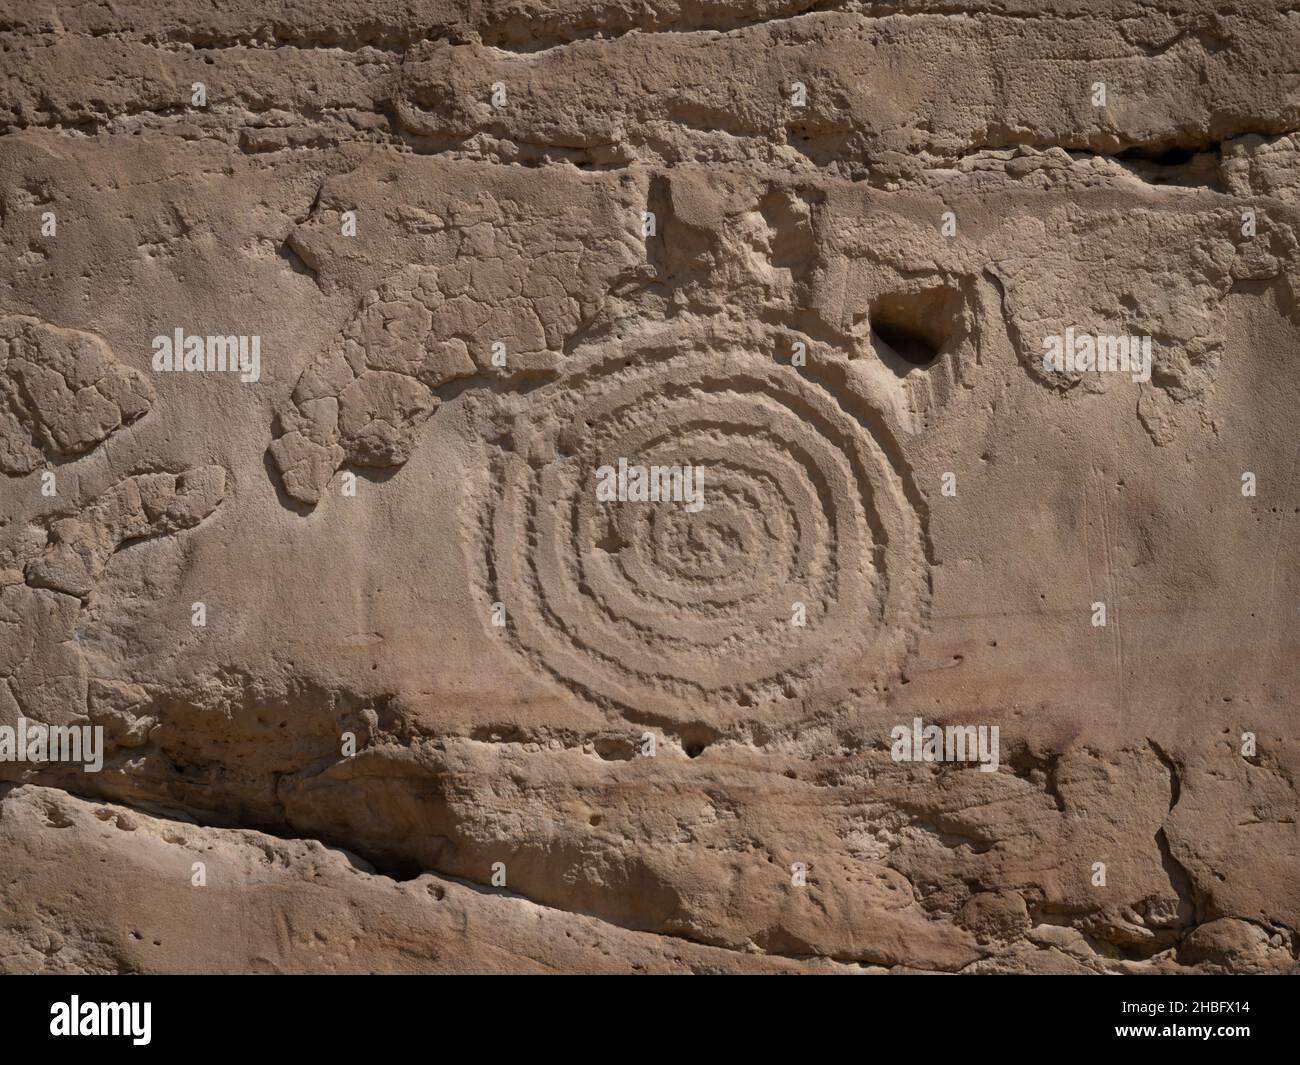 Ancient engraving or petroglyph on a sandstone cliff at Chaco Culture National Historic Park in New Mexico. Stock Photo